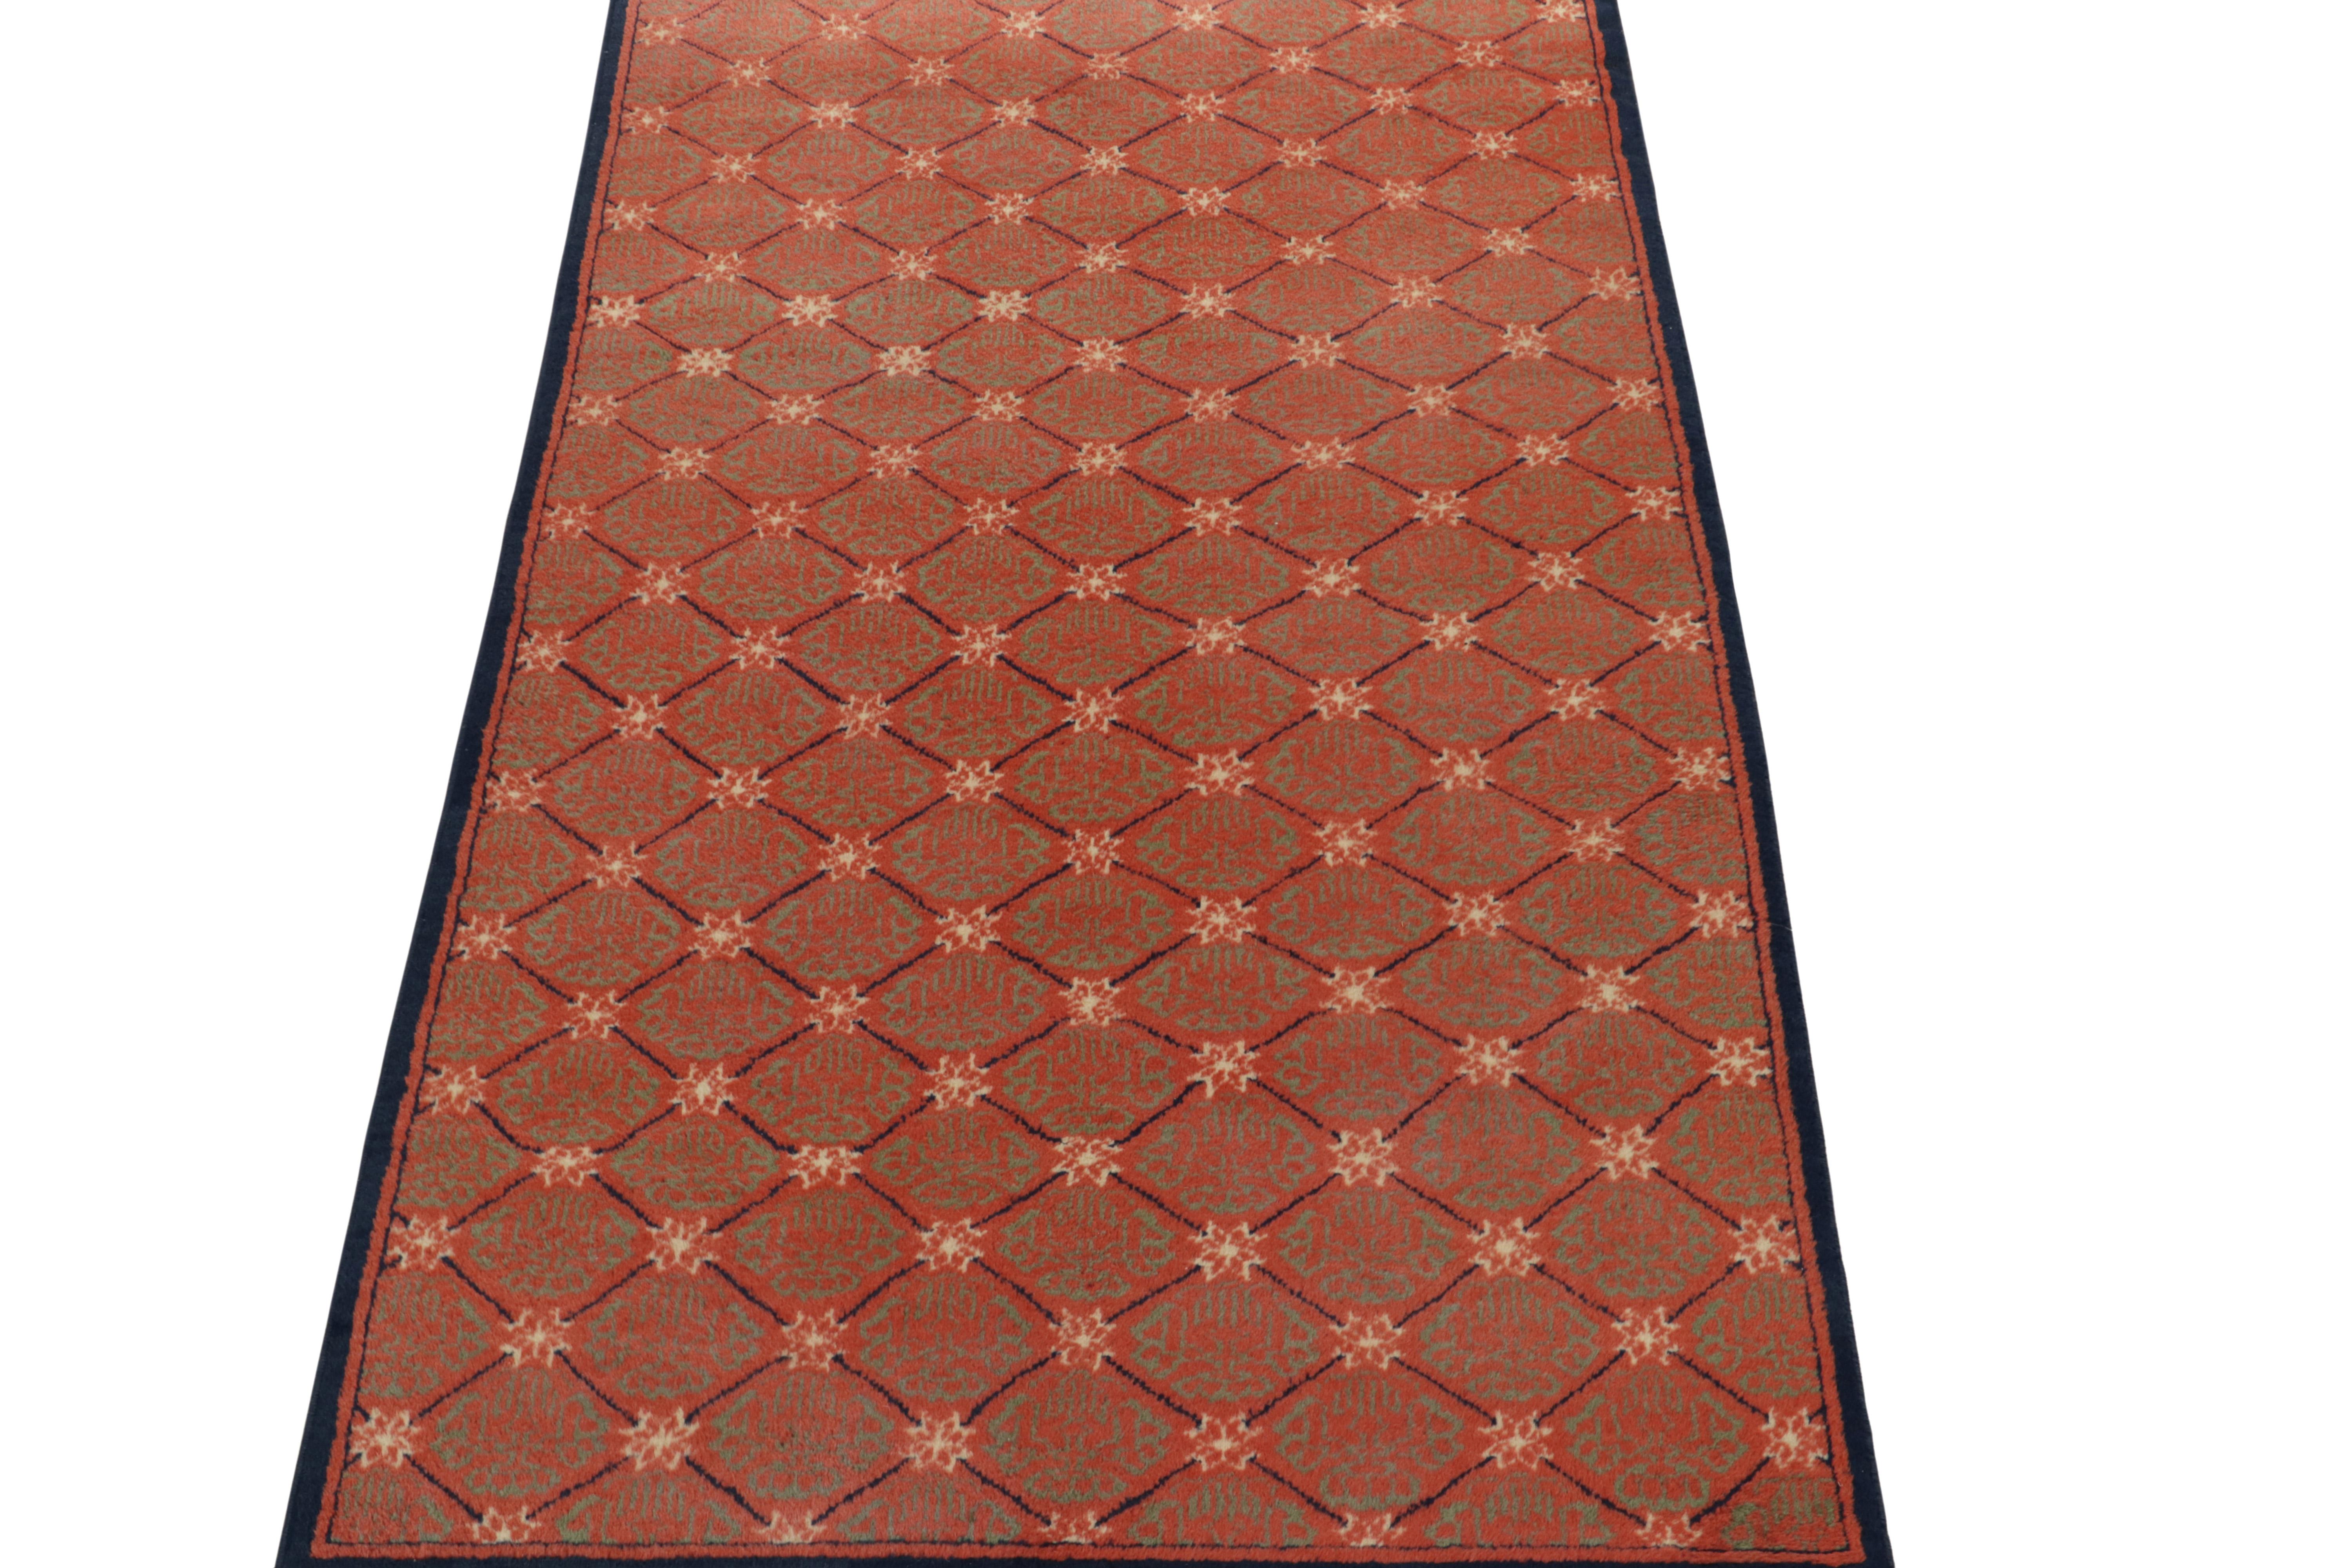 A 4x6 vintage rug exemplifying unique Turkish Art Deco sensibilities, among the latest to join our Mid Century Pasha Collection. 

Coming from an acclaimed Turkish designer, this 1960s piece makes a subdued take on Art Deco style with muted green